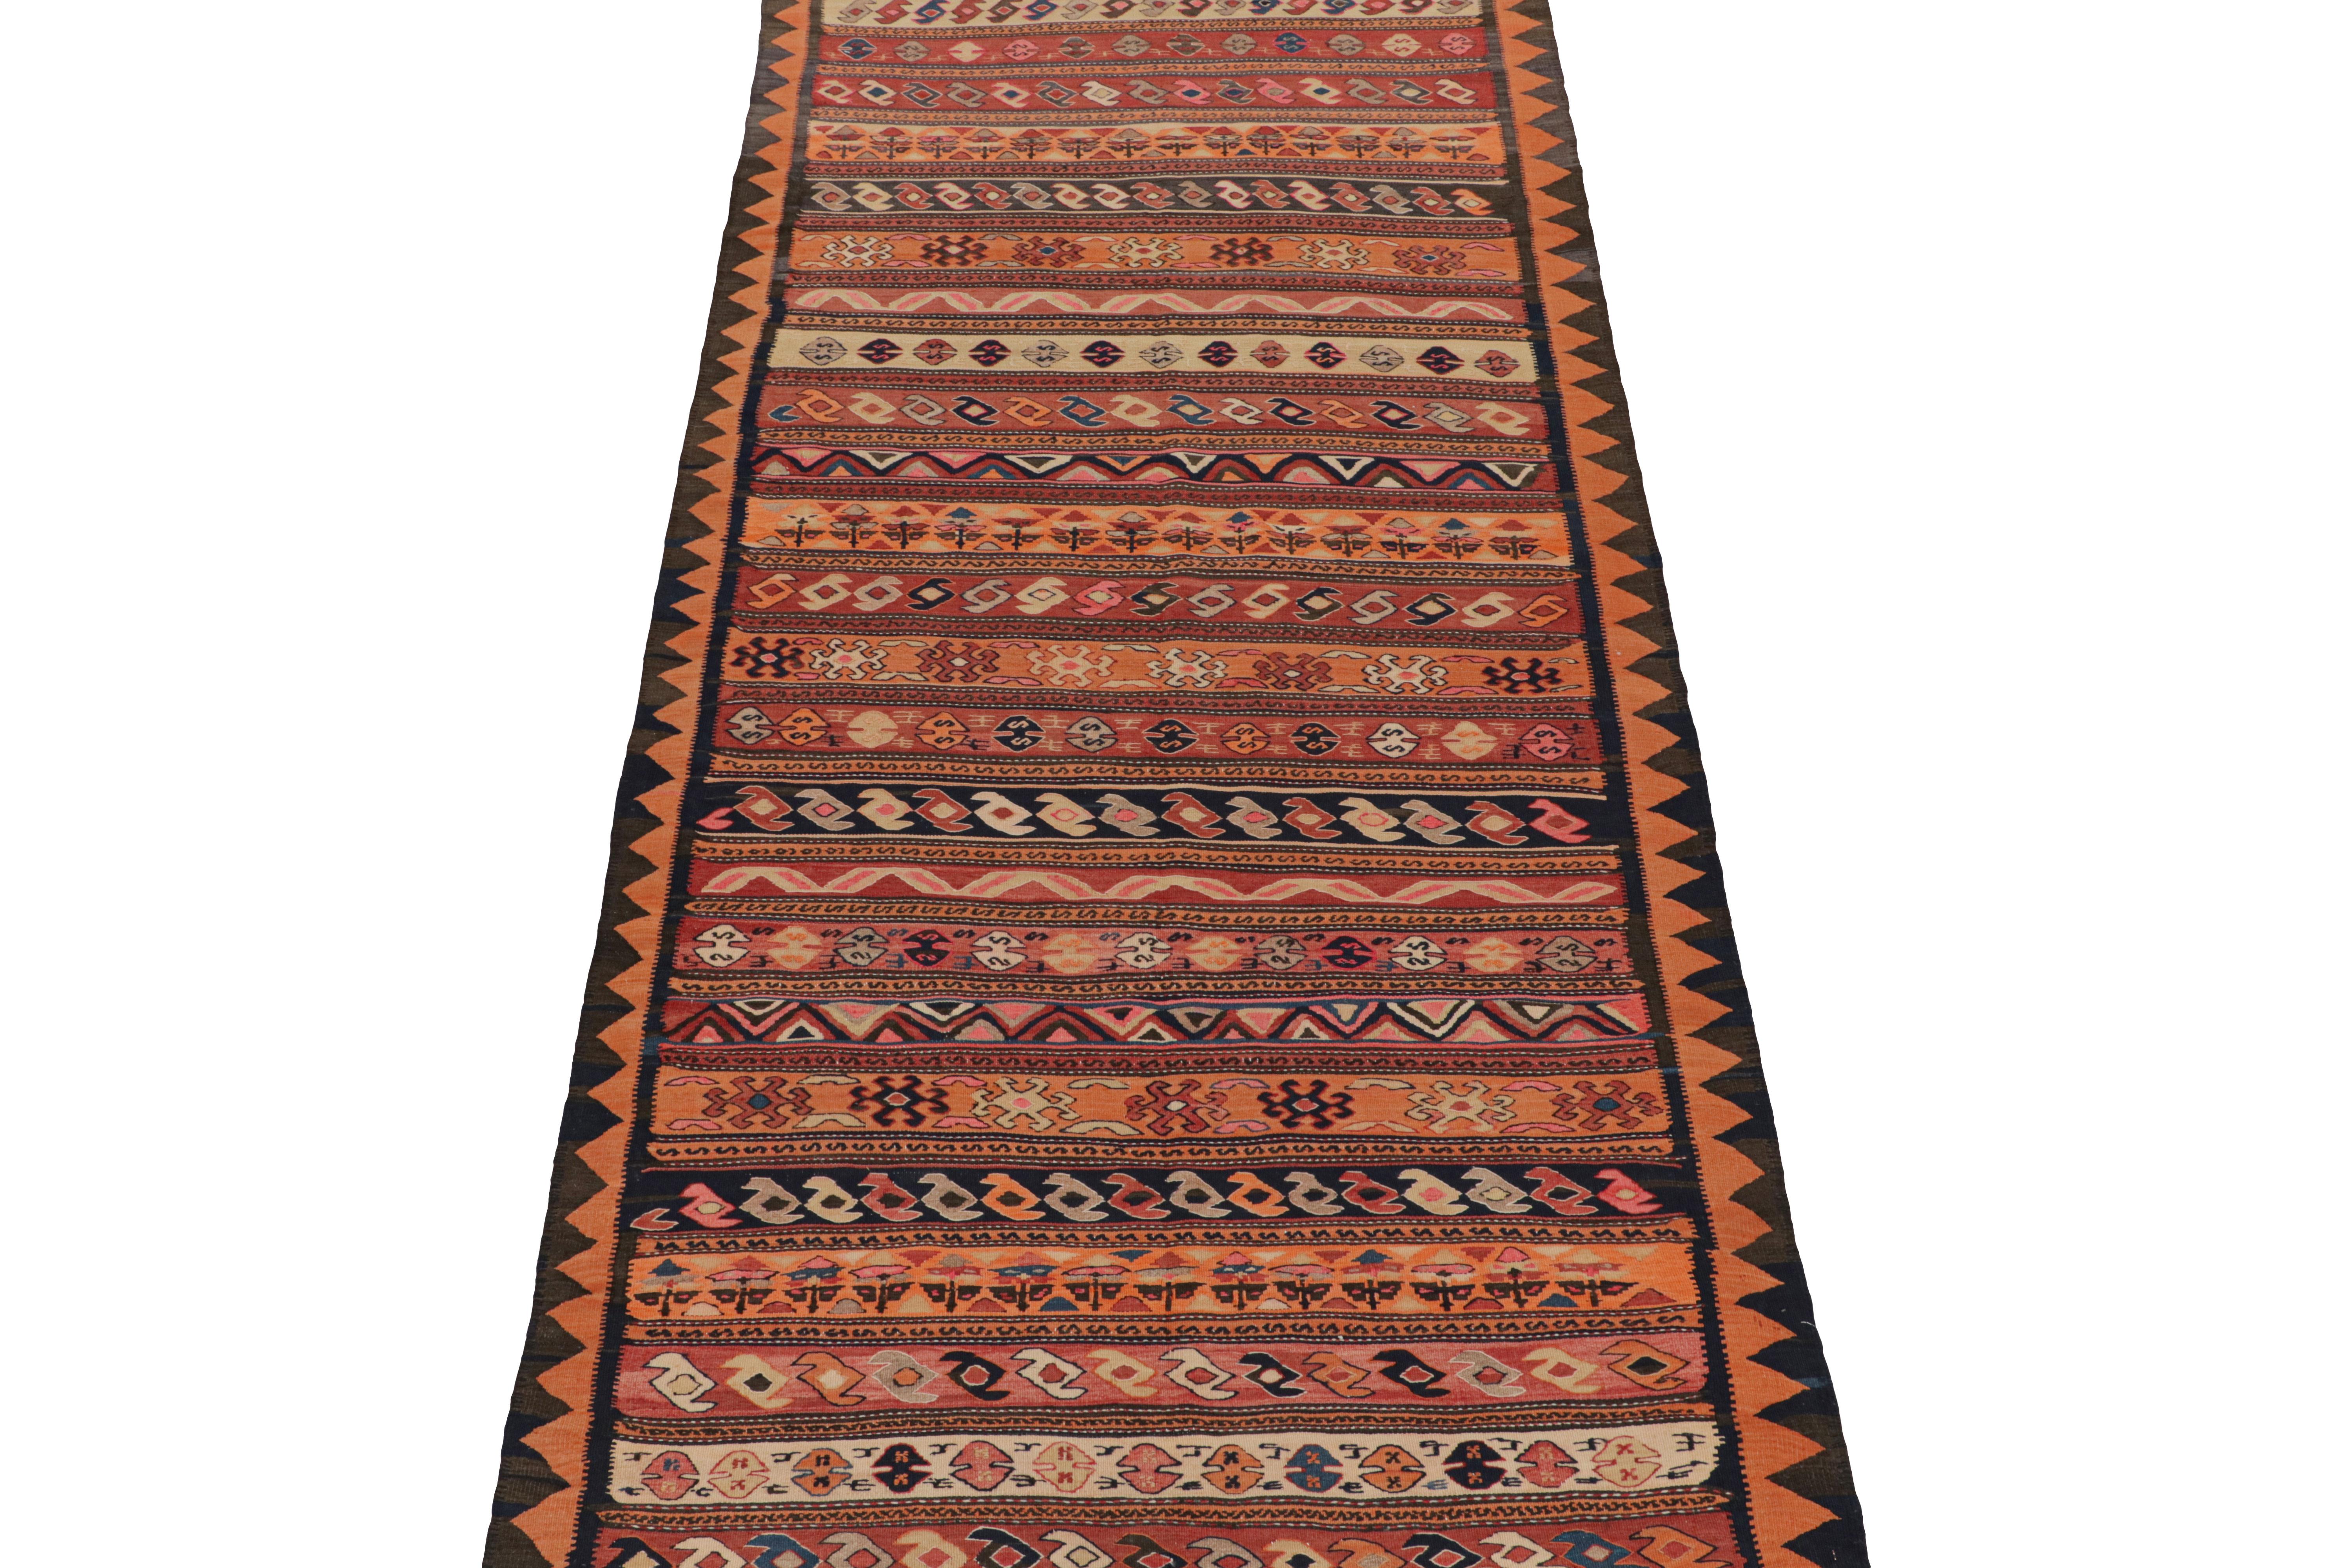 This vintage 5x11 Persian Kilim is believed to be a Shahsavan tribal rug, handwoven in wool circa 1950-1960.

Further on the Design:

The sheer level of detail and variation sets this Kilim apart from many in its kind. It’s an intricate piece with a